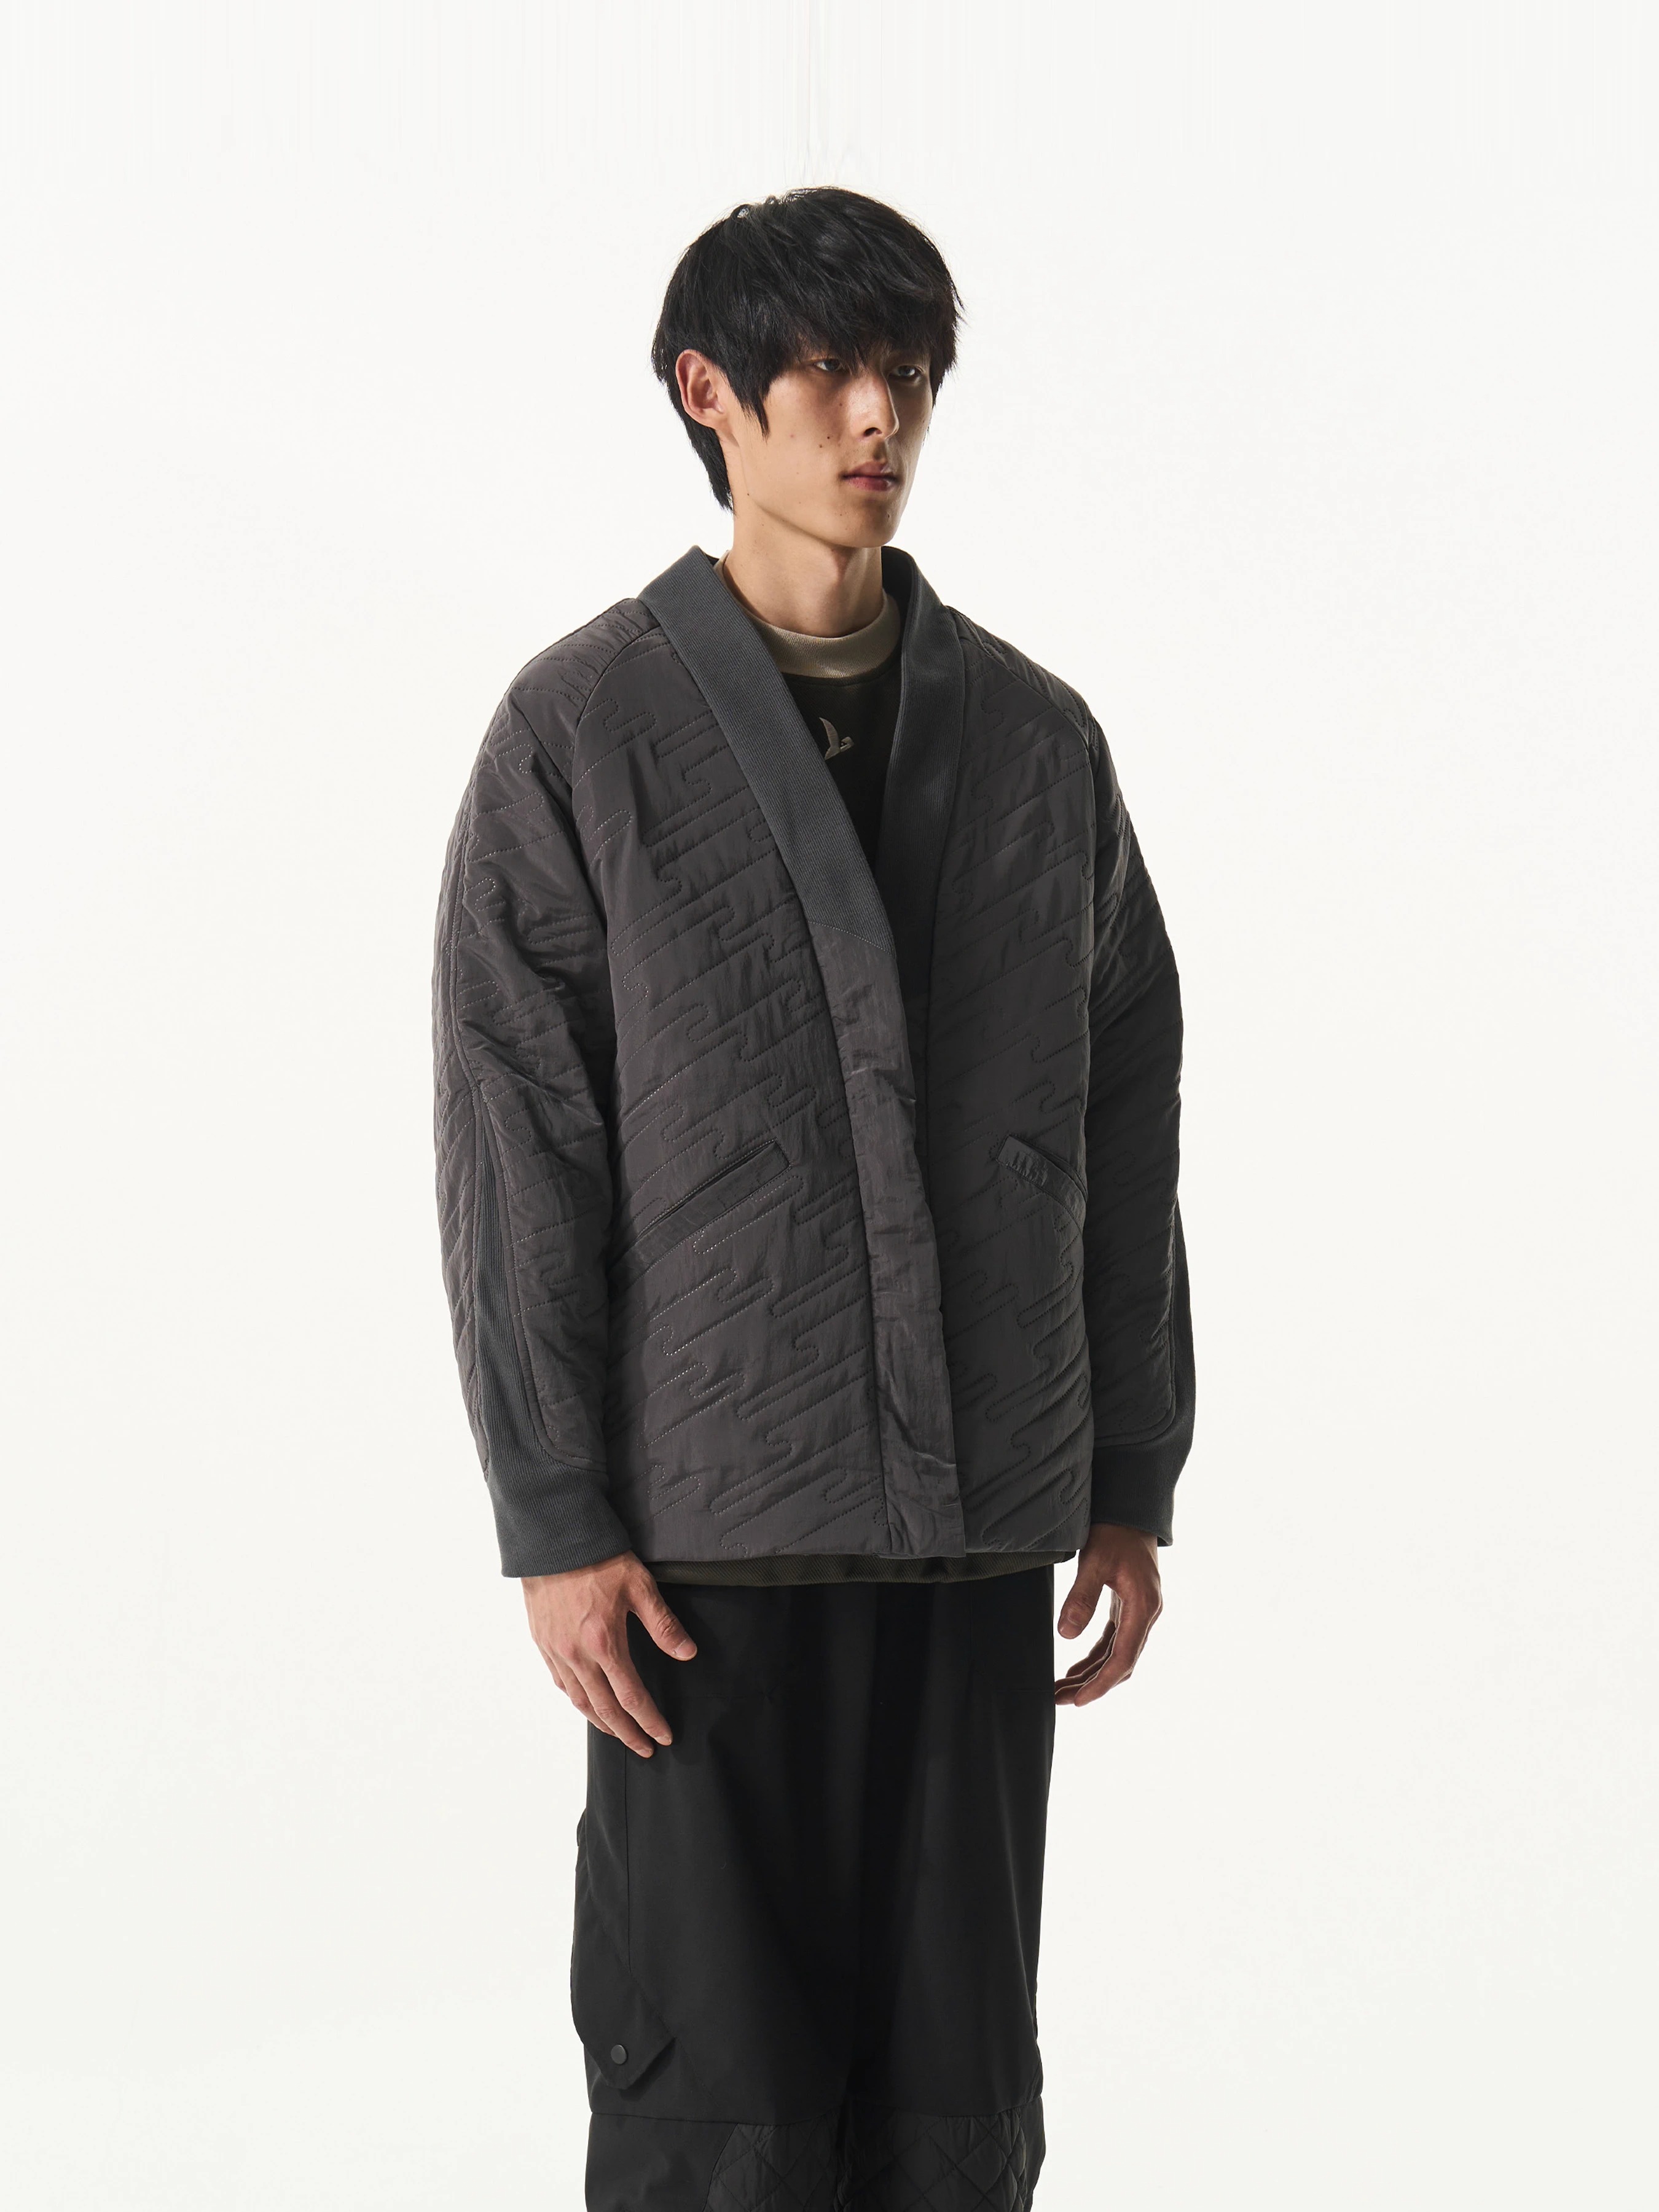 HALCYON 23AW Woven and Stitched Twill Patchwork New Shearling Robe